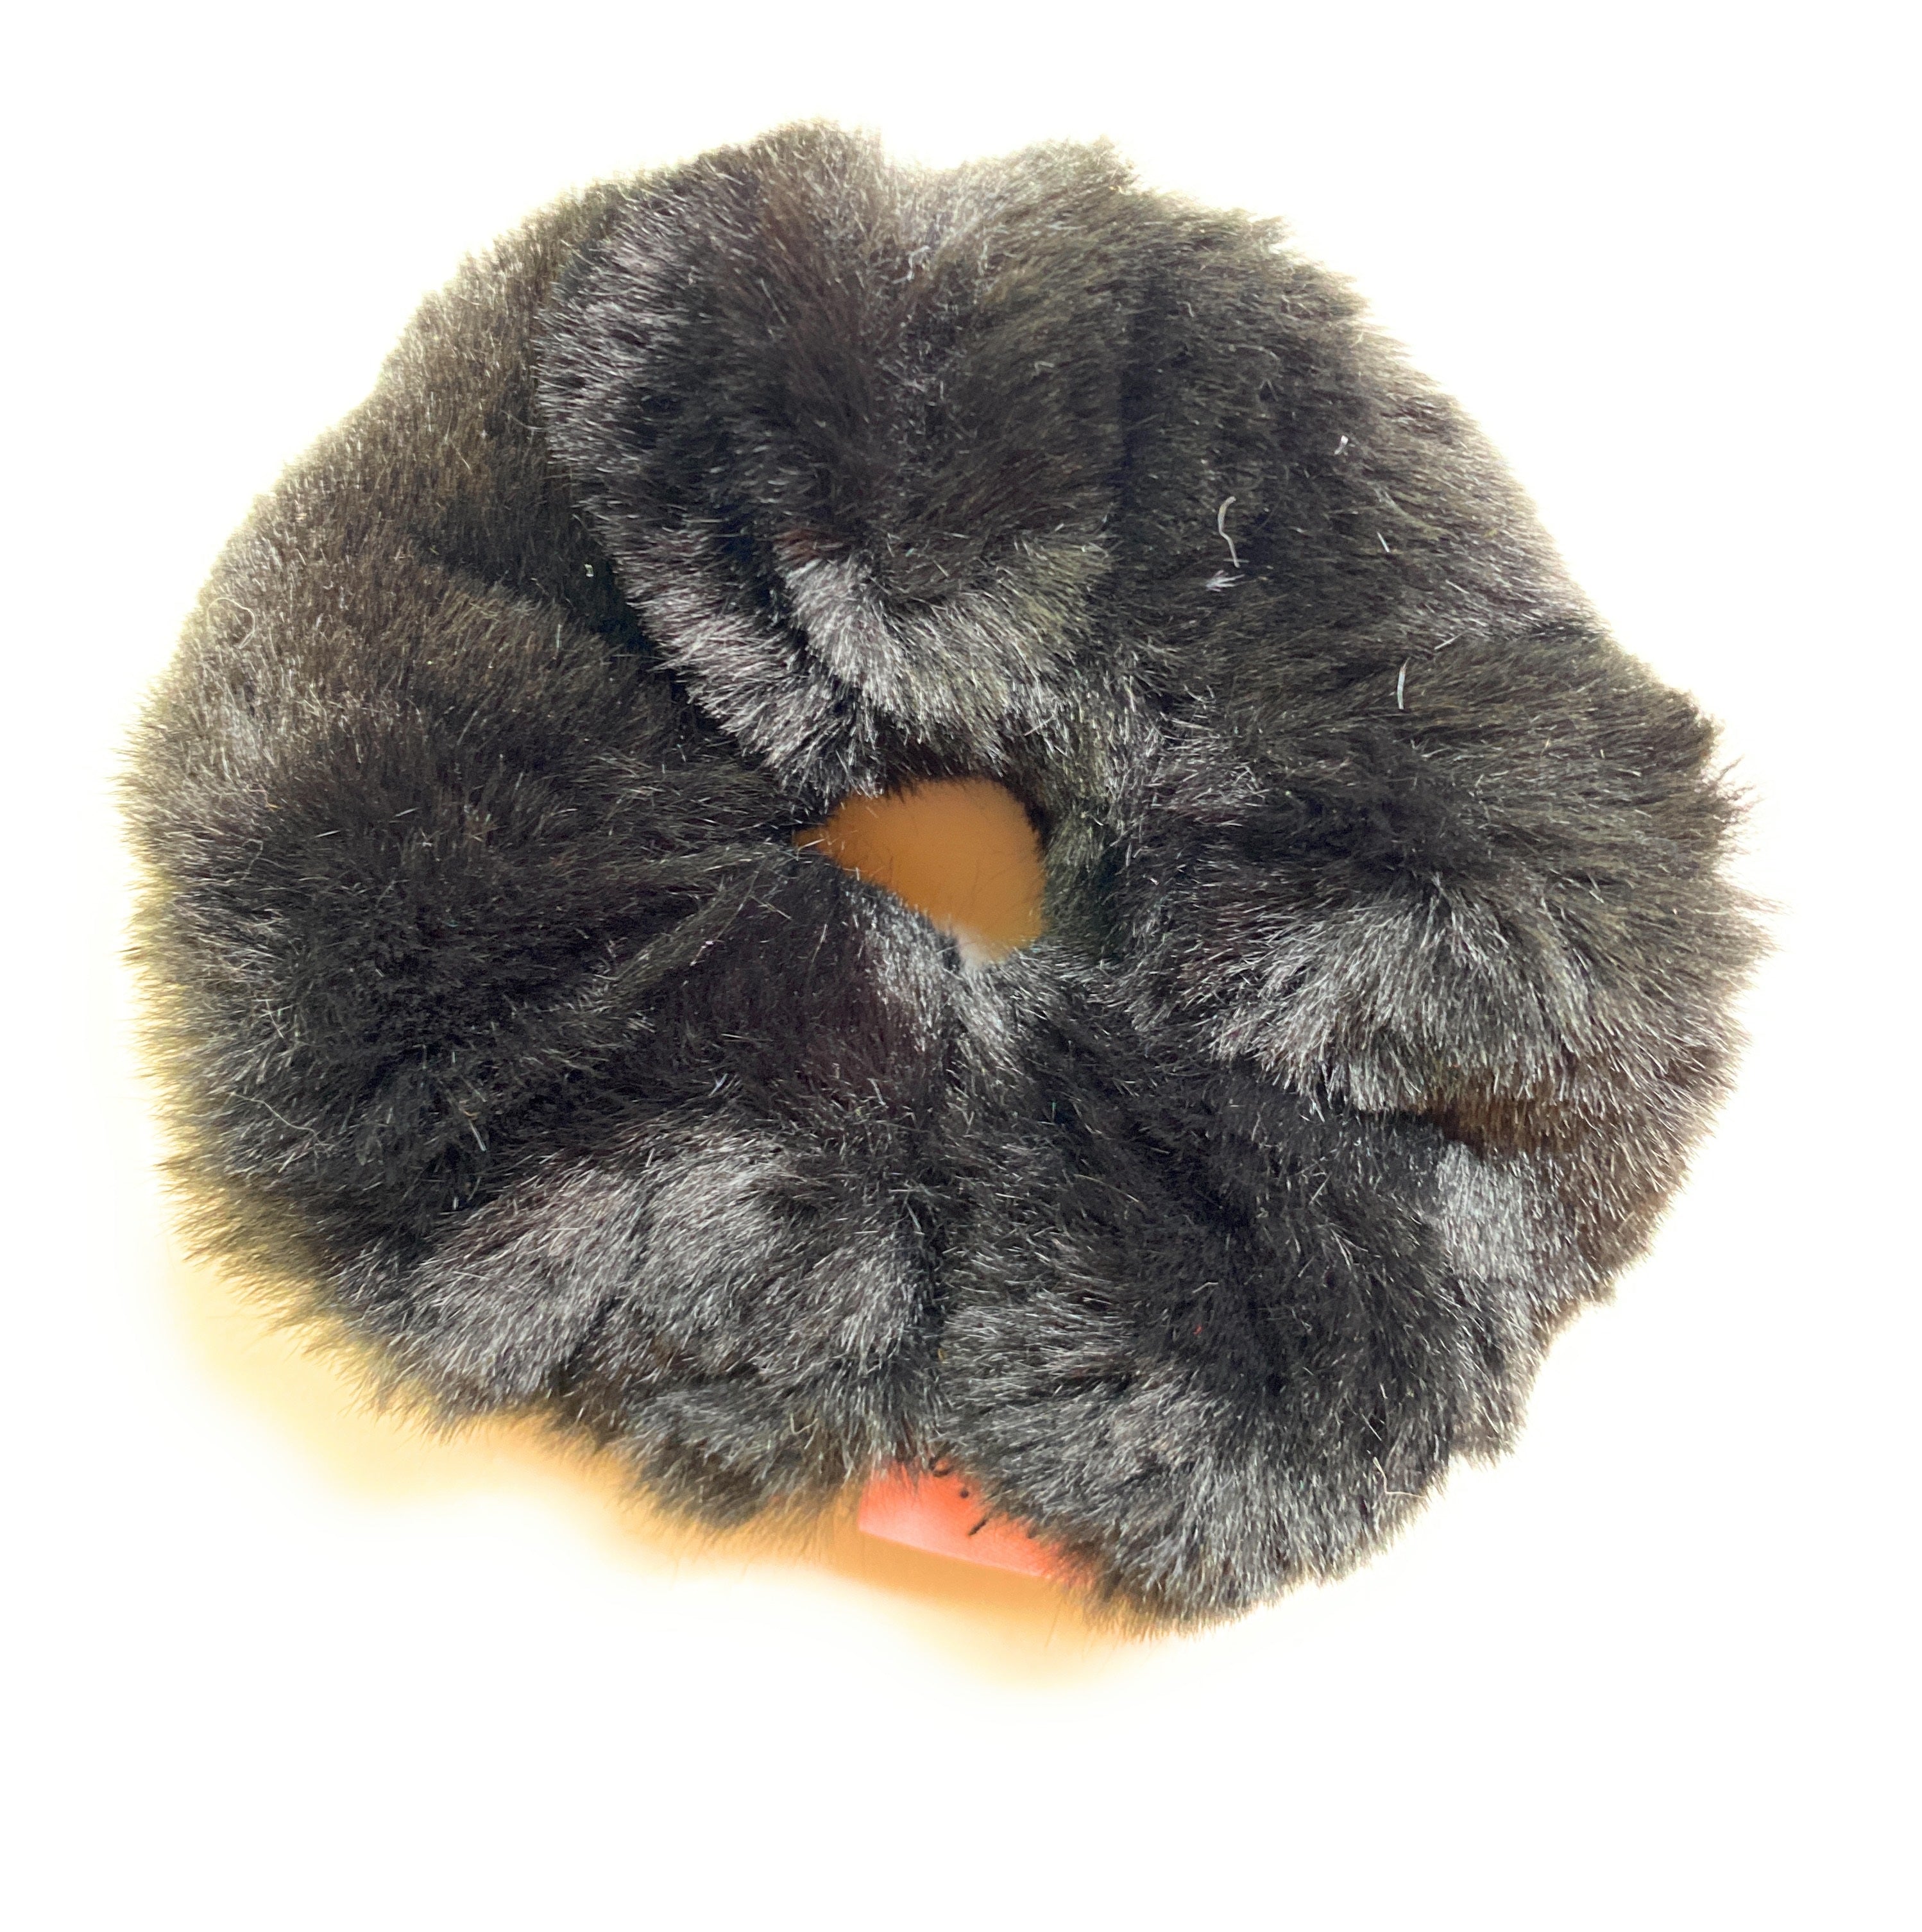 Mia Beauty Furry Scrunchie Ponytail holder hair accessory black color